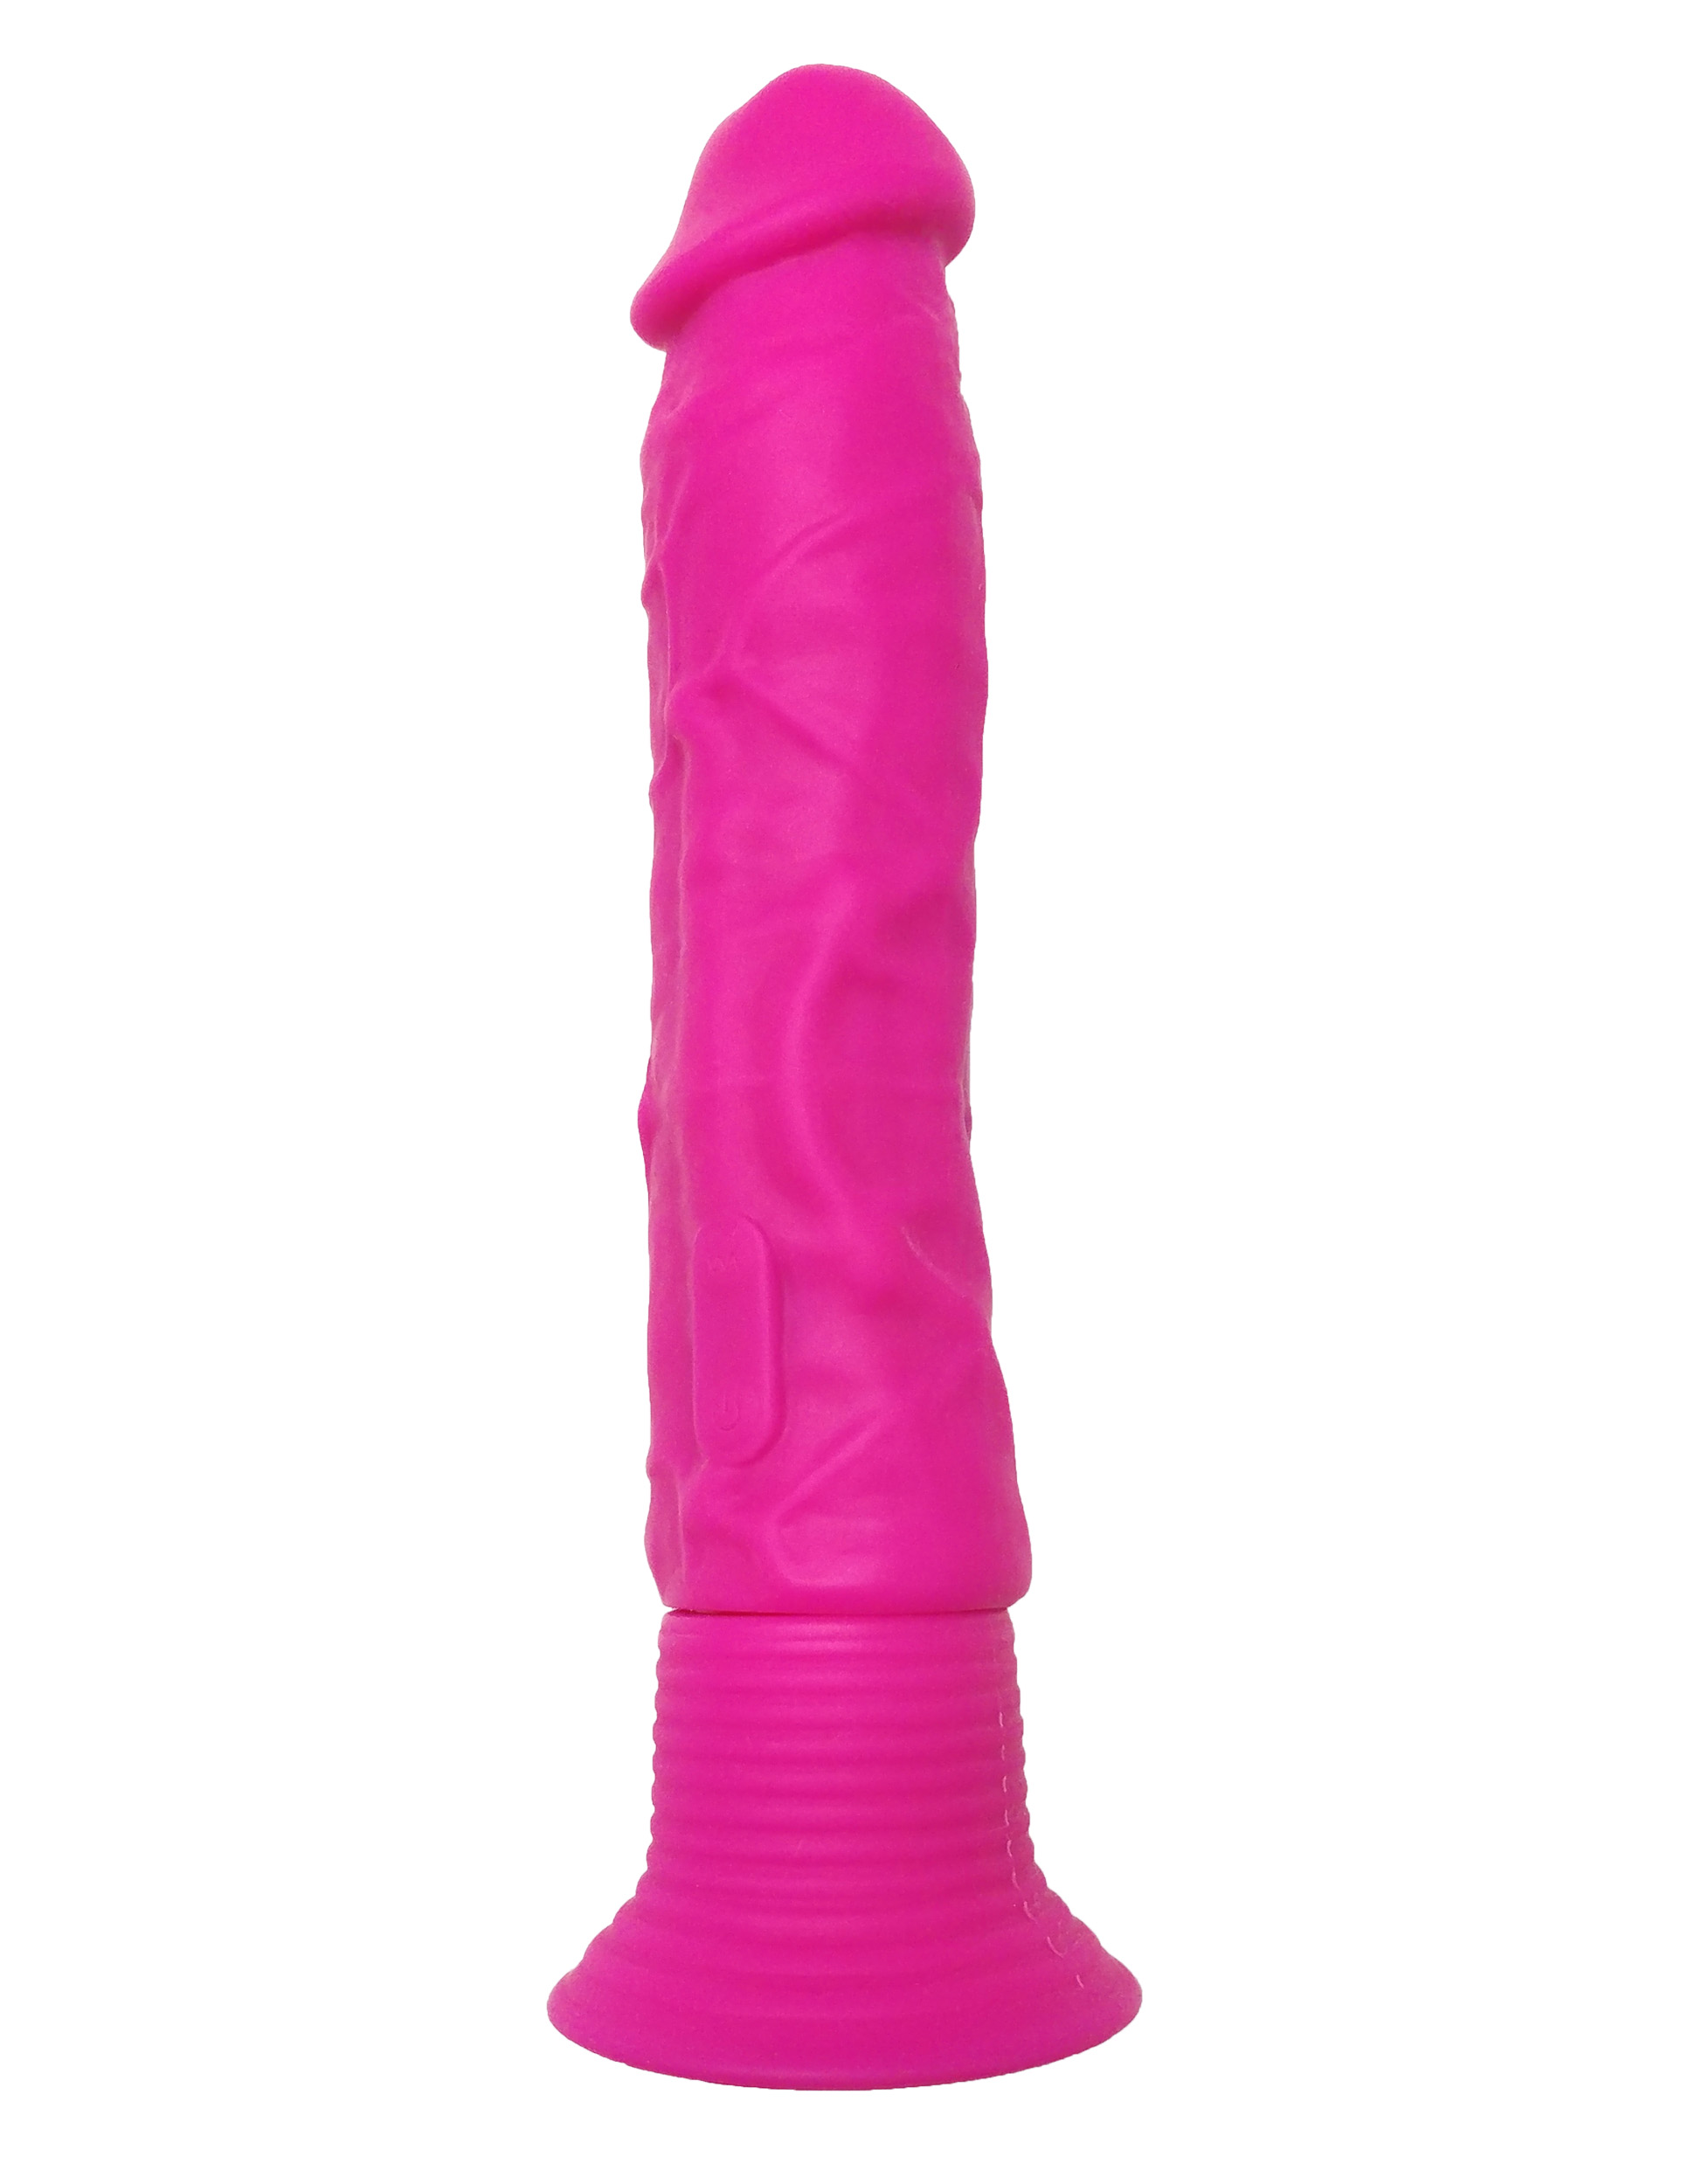 Neon++Silicone+Wall+Banger+Suction+Cup+Dildo